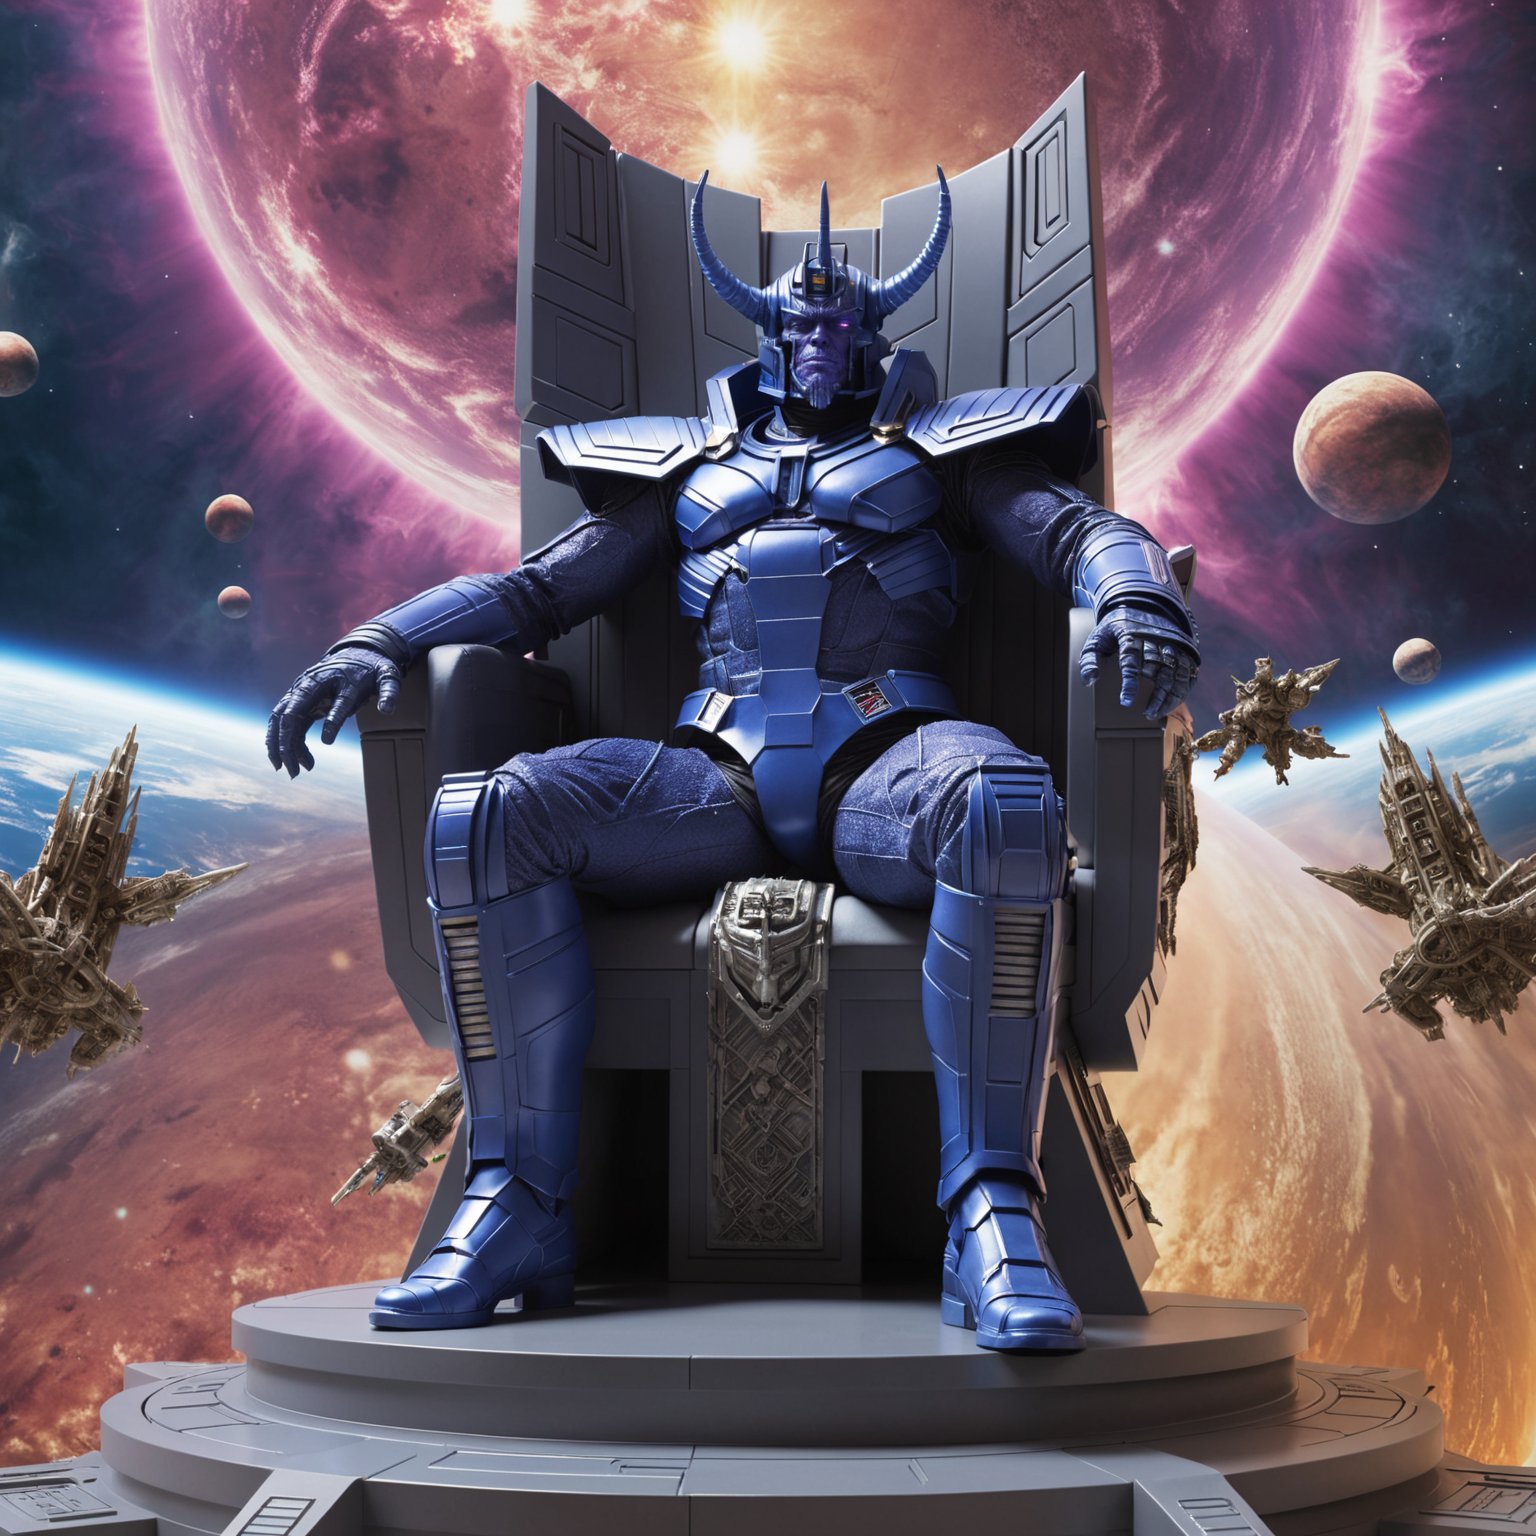 Galactus destroyer of worlds, sat on his throne, space, spaceship, intricate detail